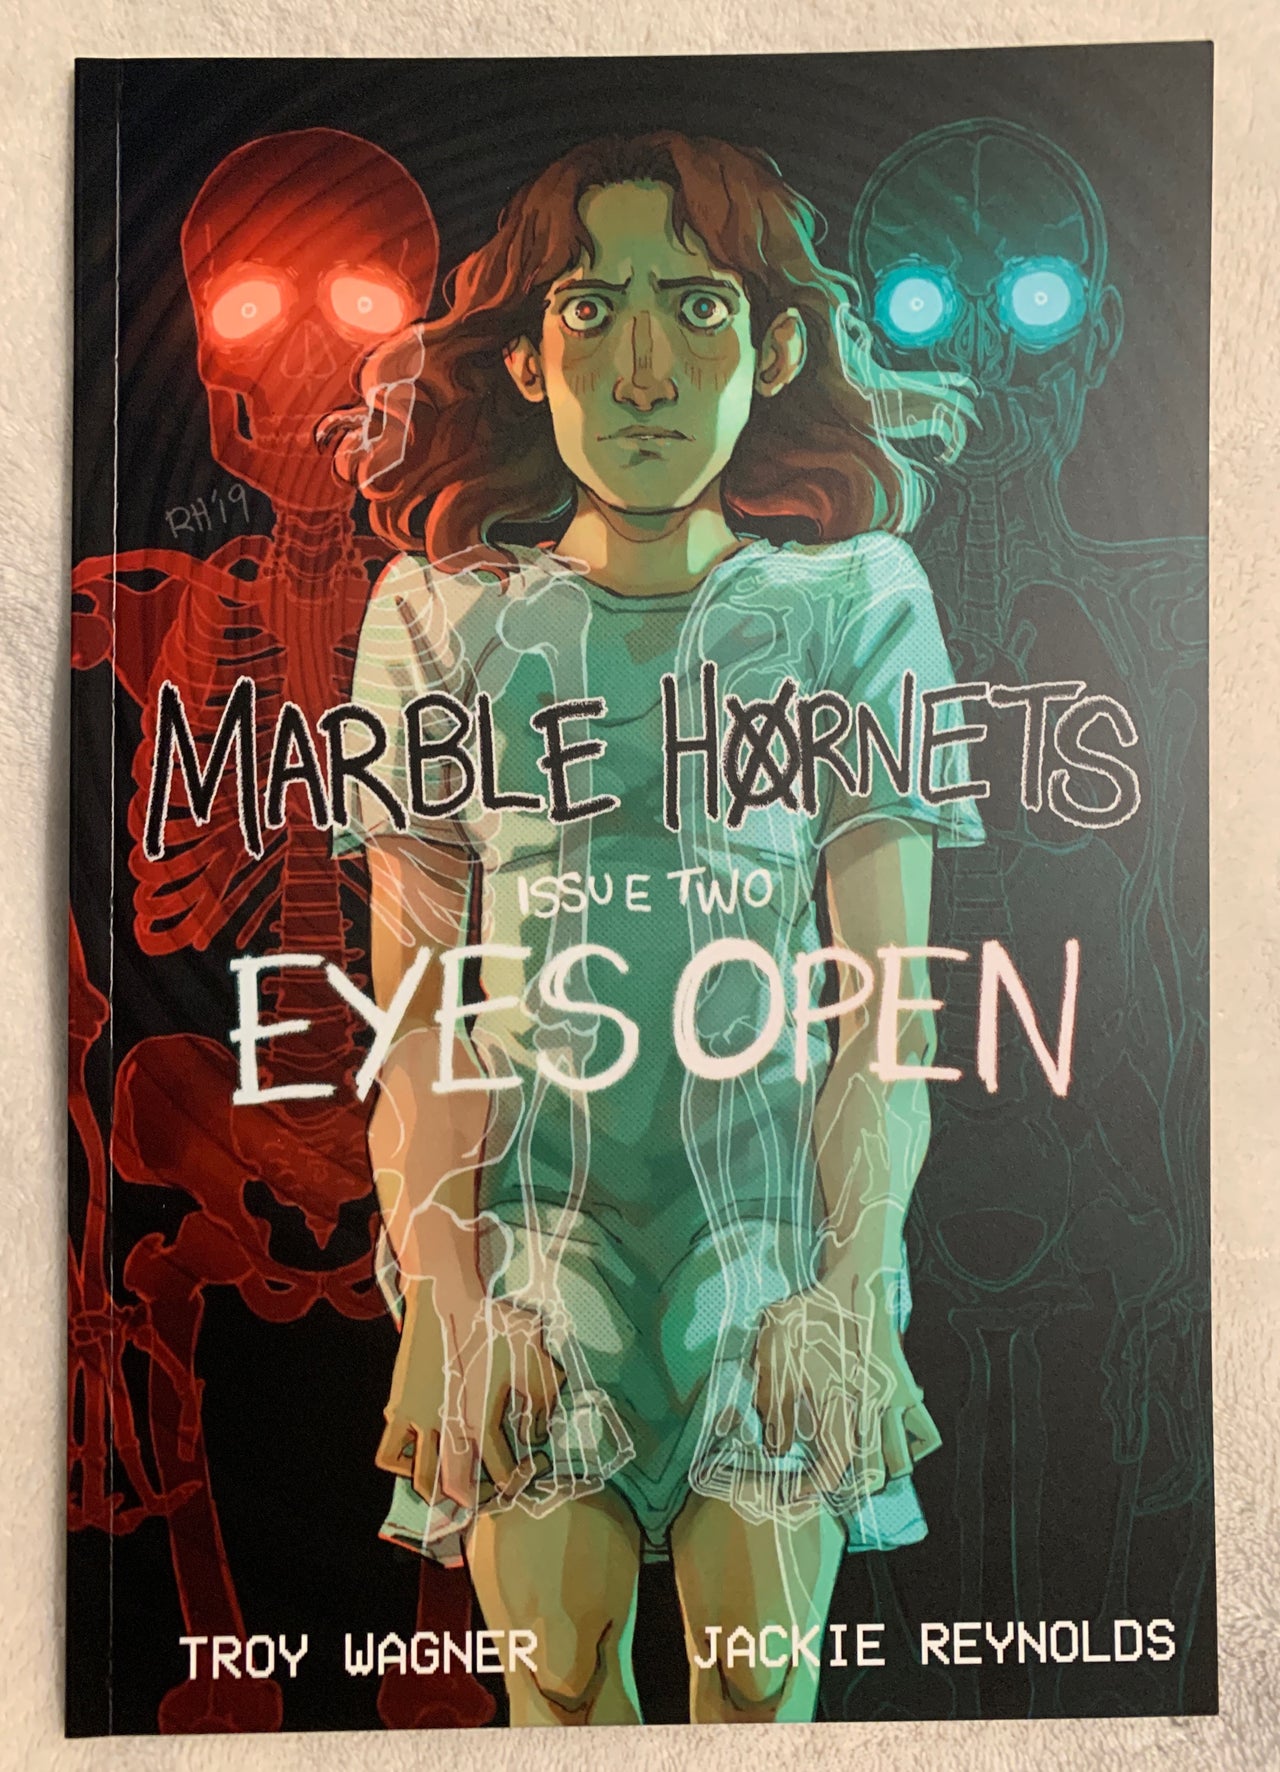 Print Edition - Marble Hornets Issue 2: Eyes Open